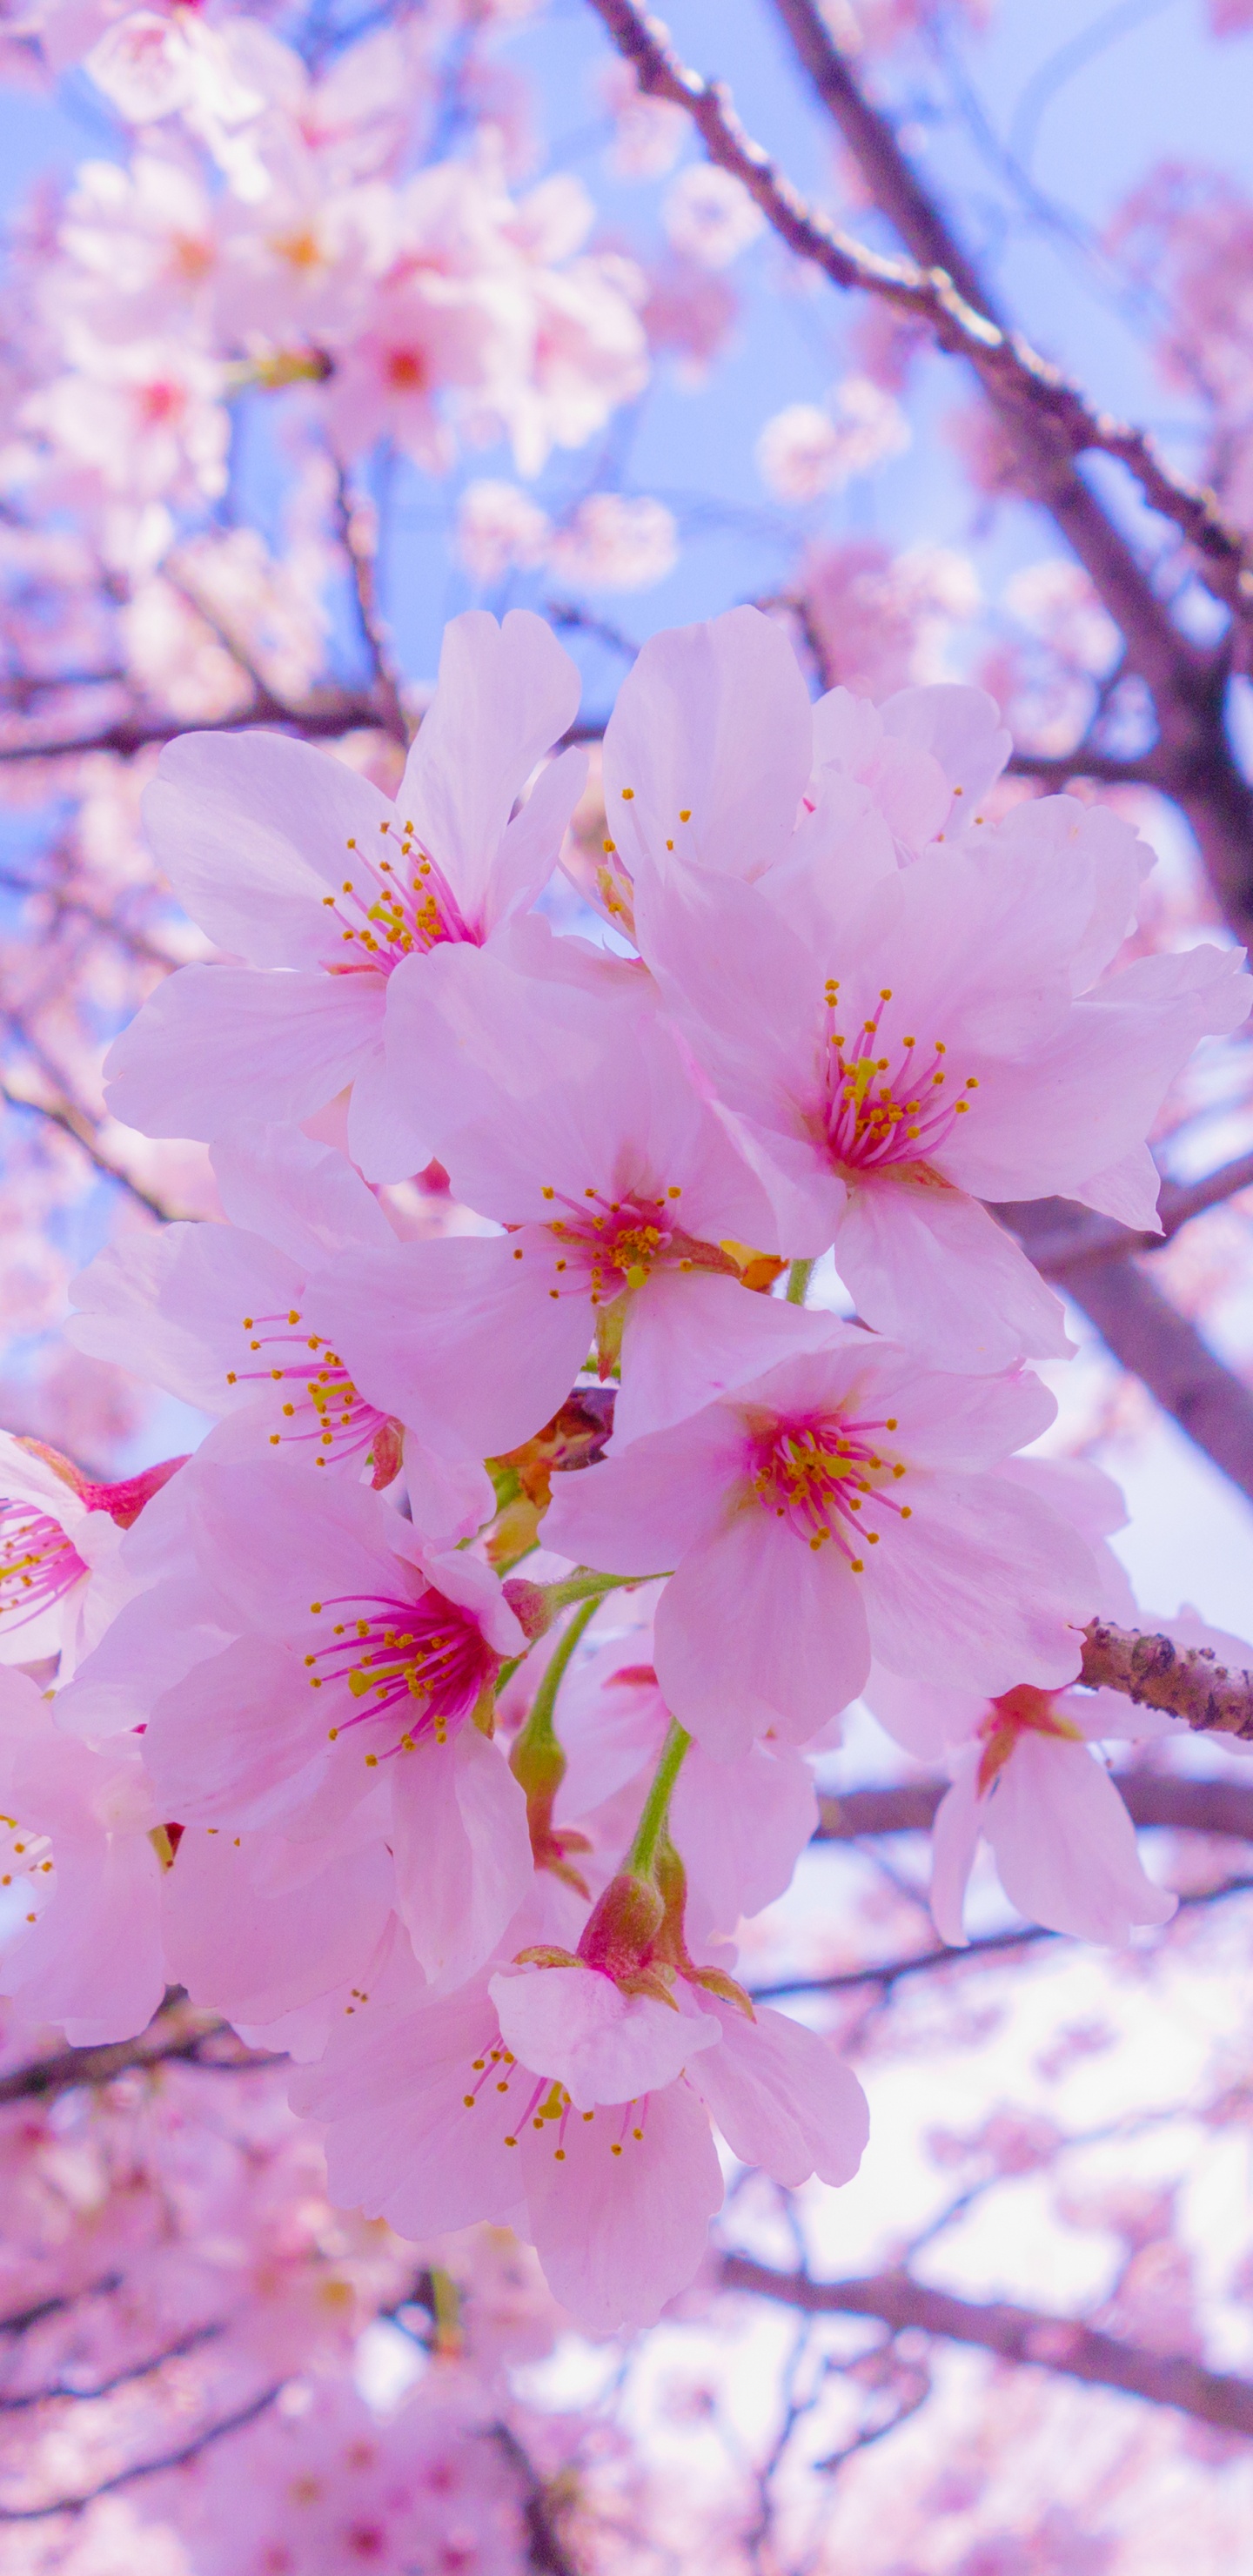 Pink Cherry Blossom Tree During Daytime. Wallpaper in 1440x2960 Resolution